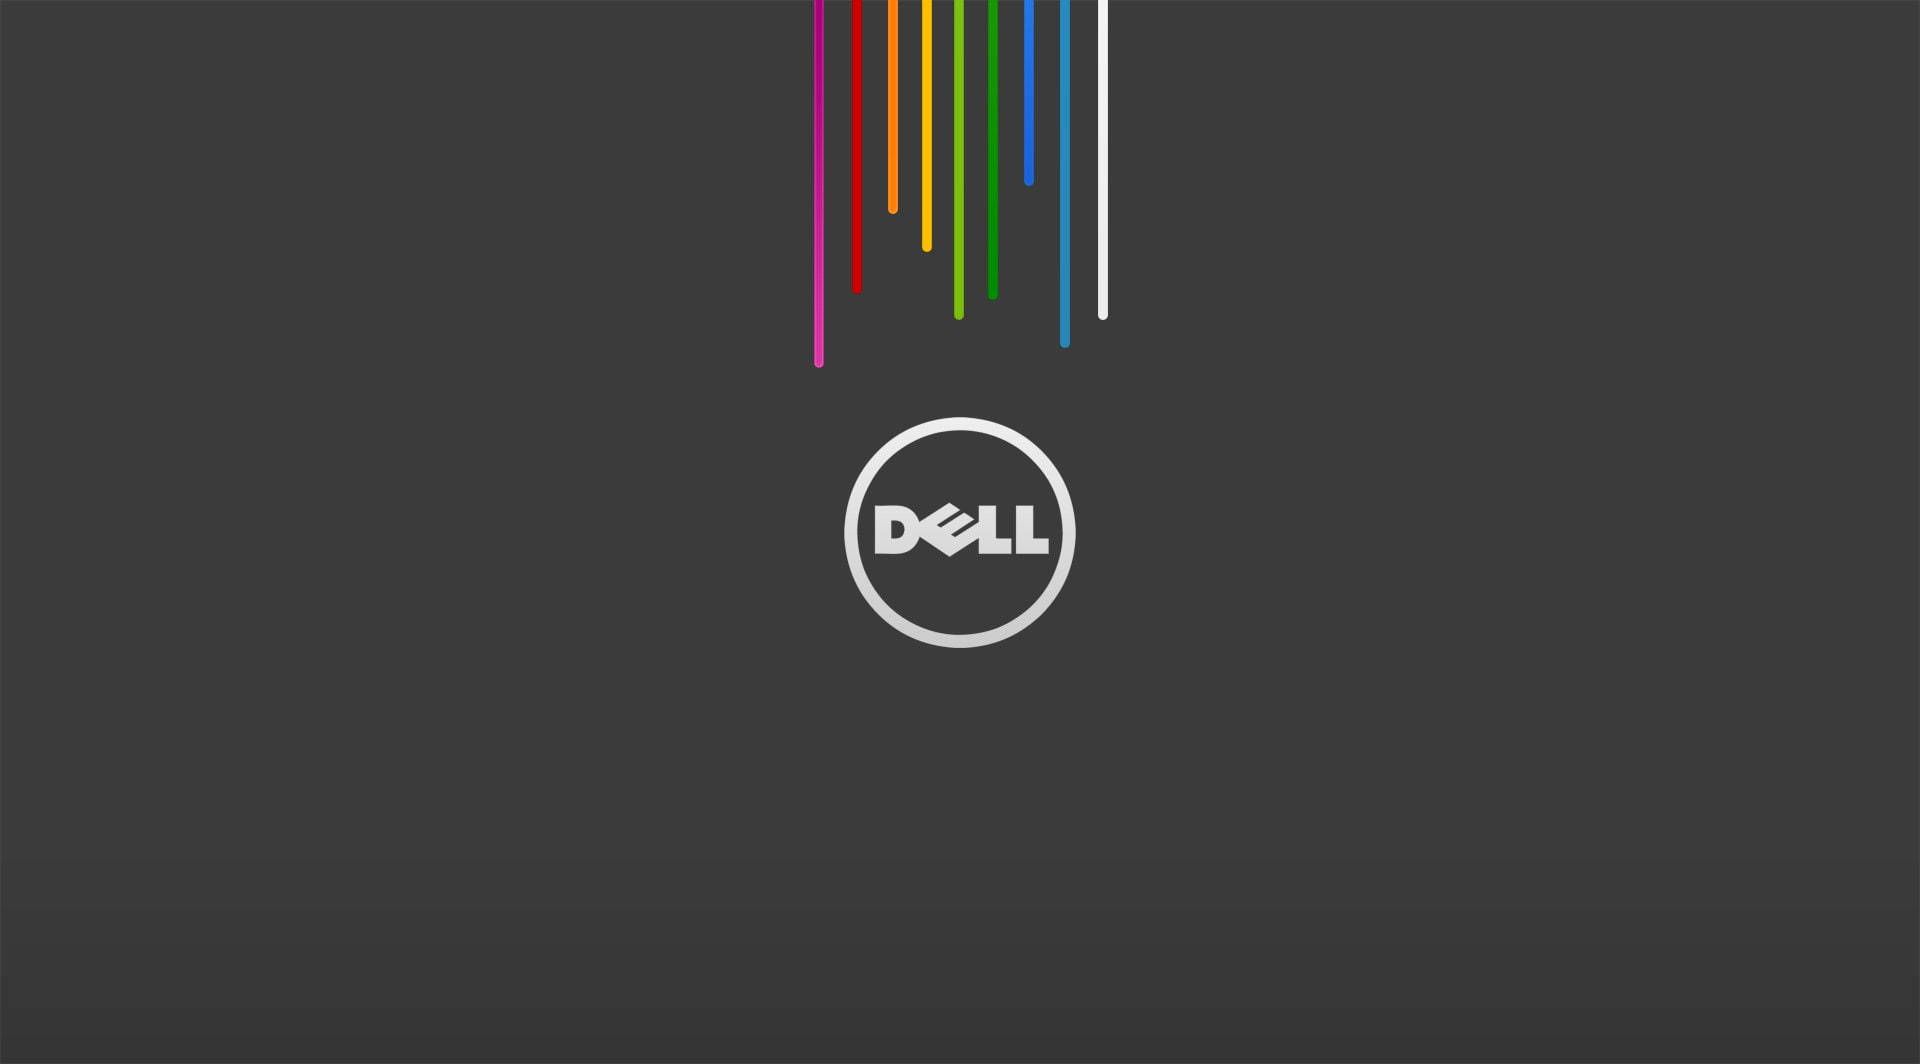 Dell Laptop Falling Colors Background